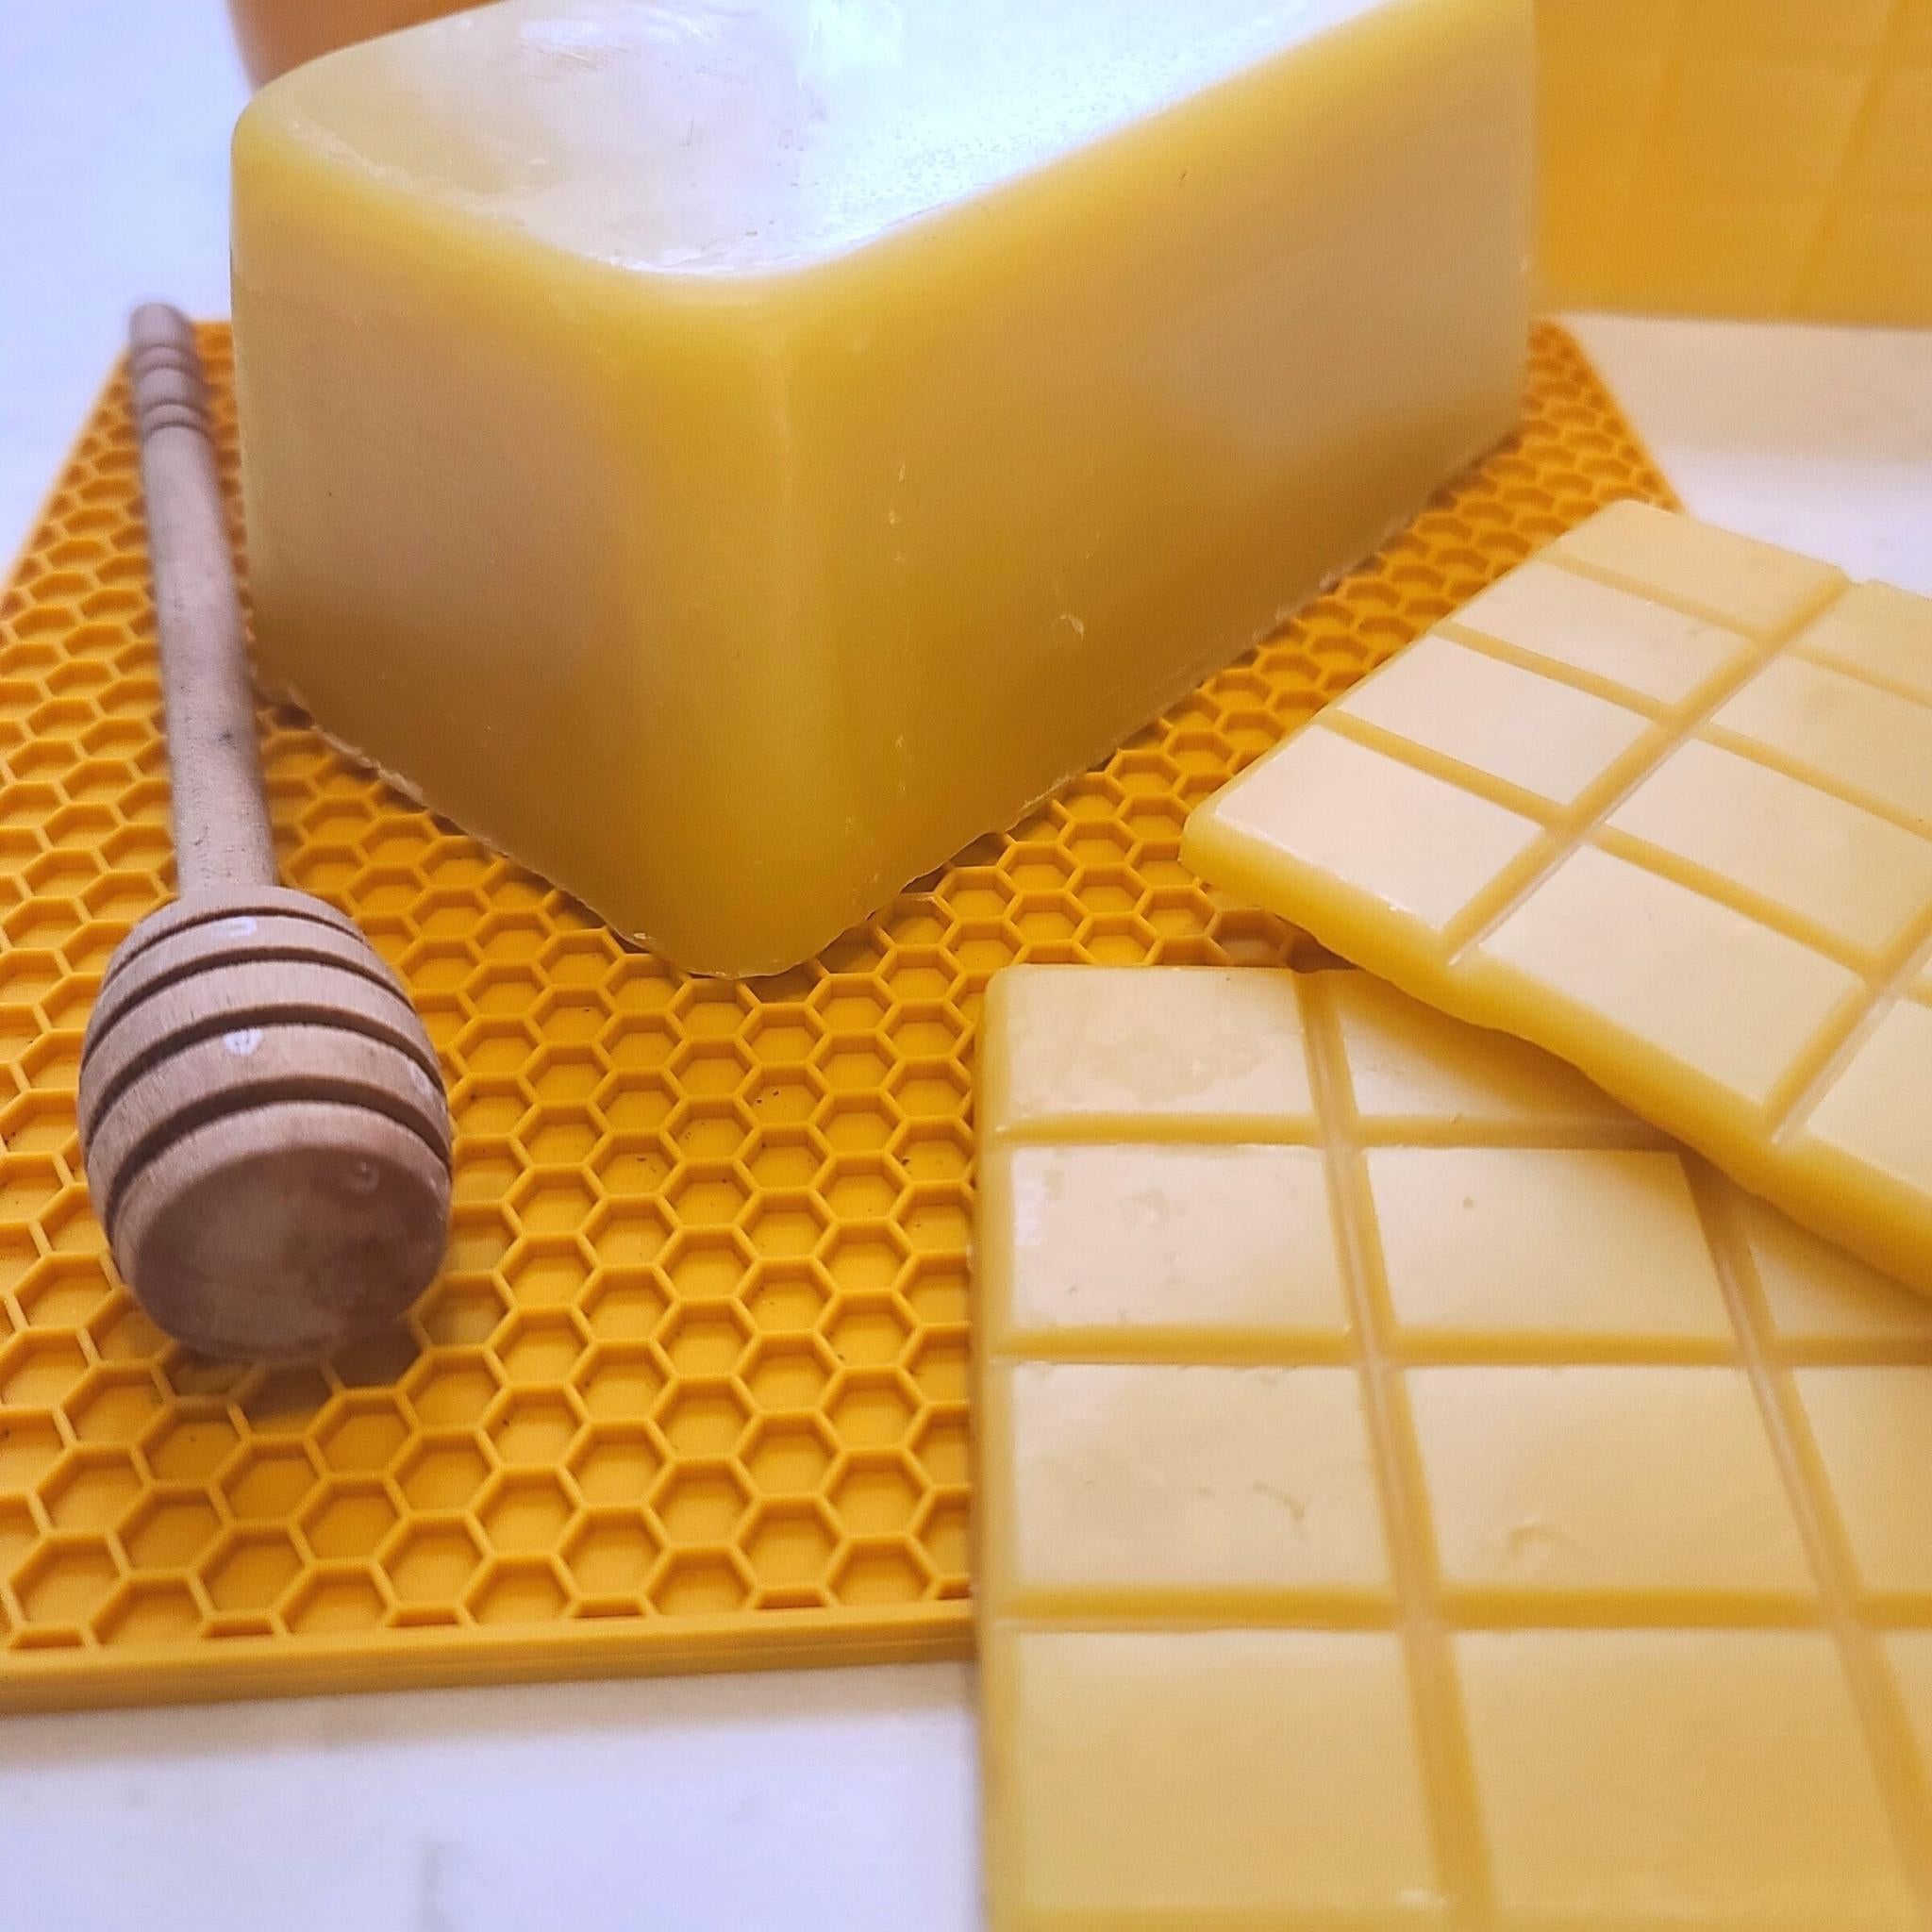 10+ DIY Crafts to Make with Beeswax (Plus Links to Recipes) – Mind